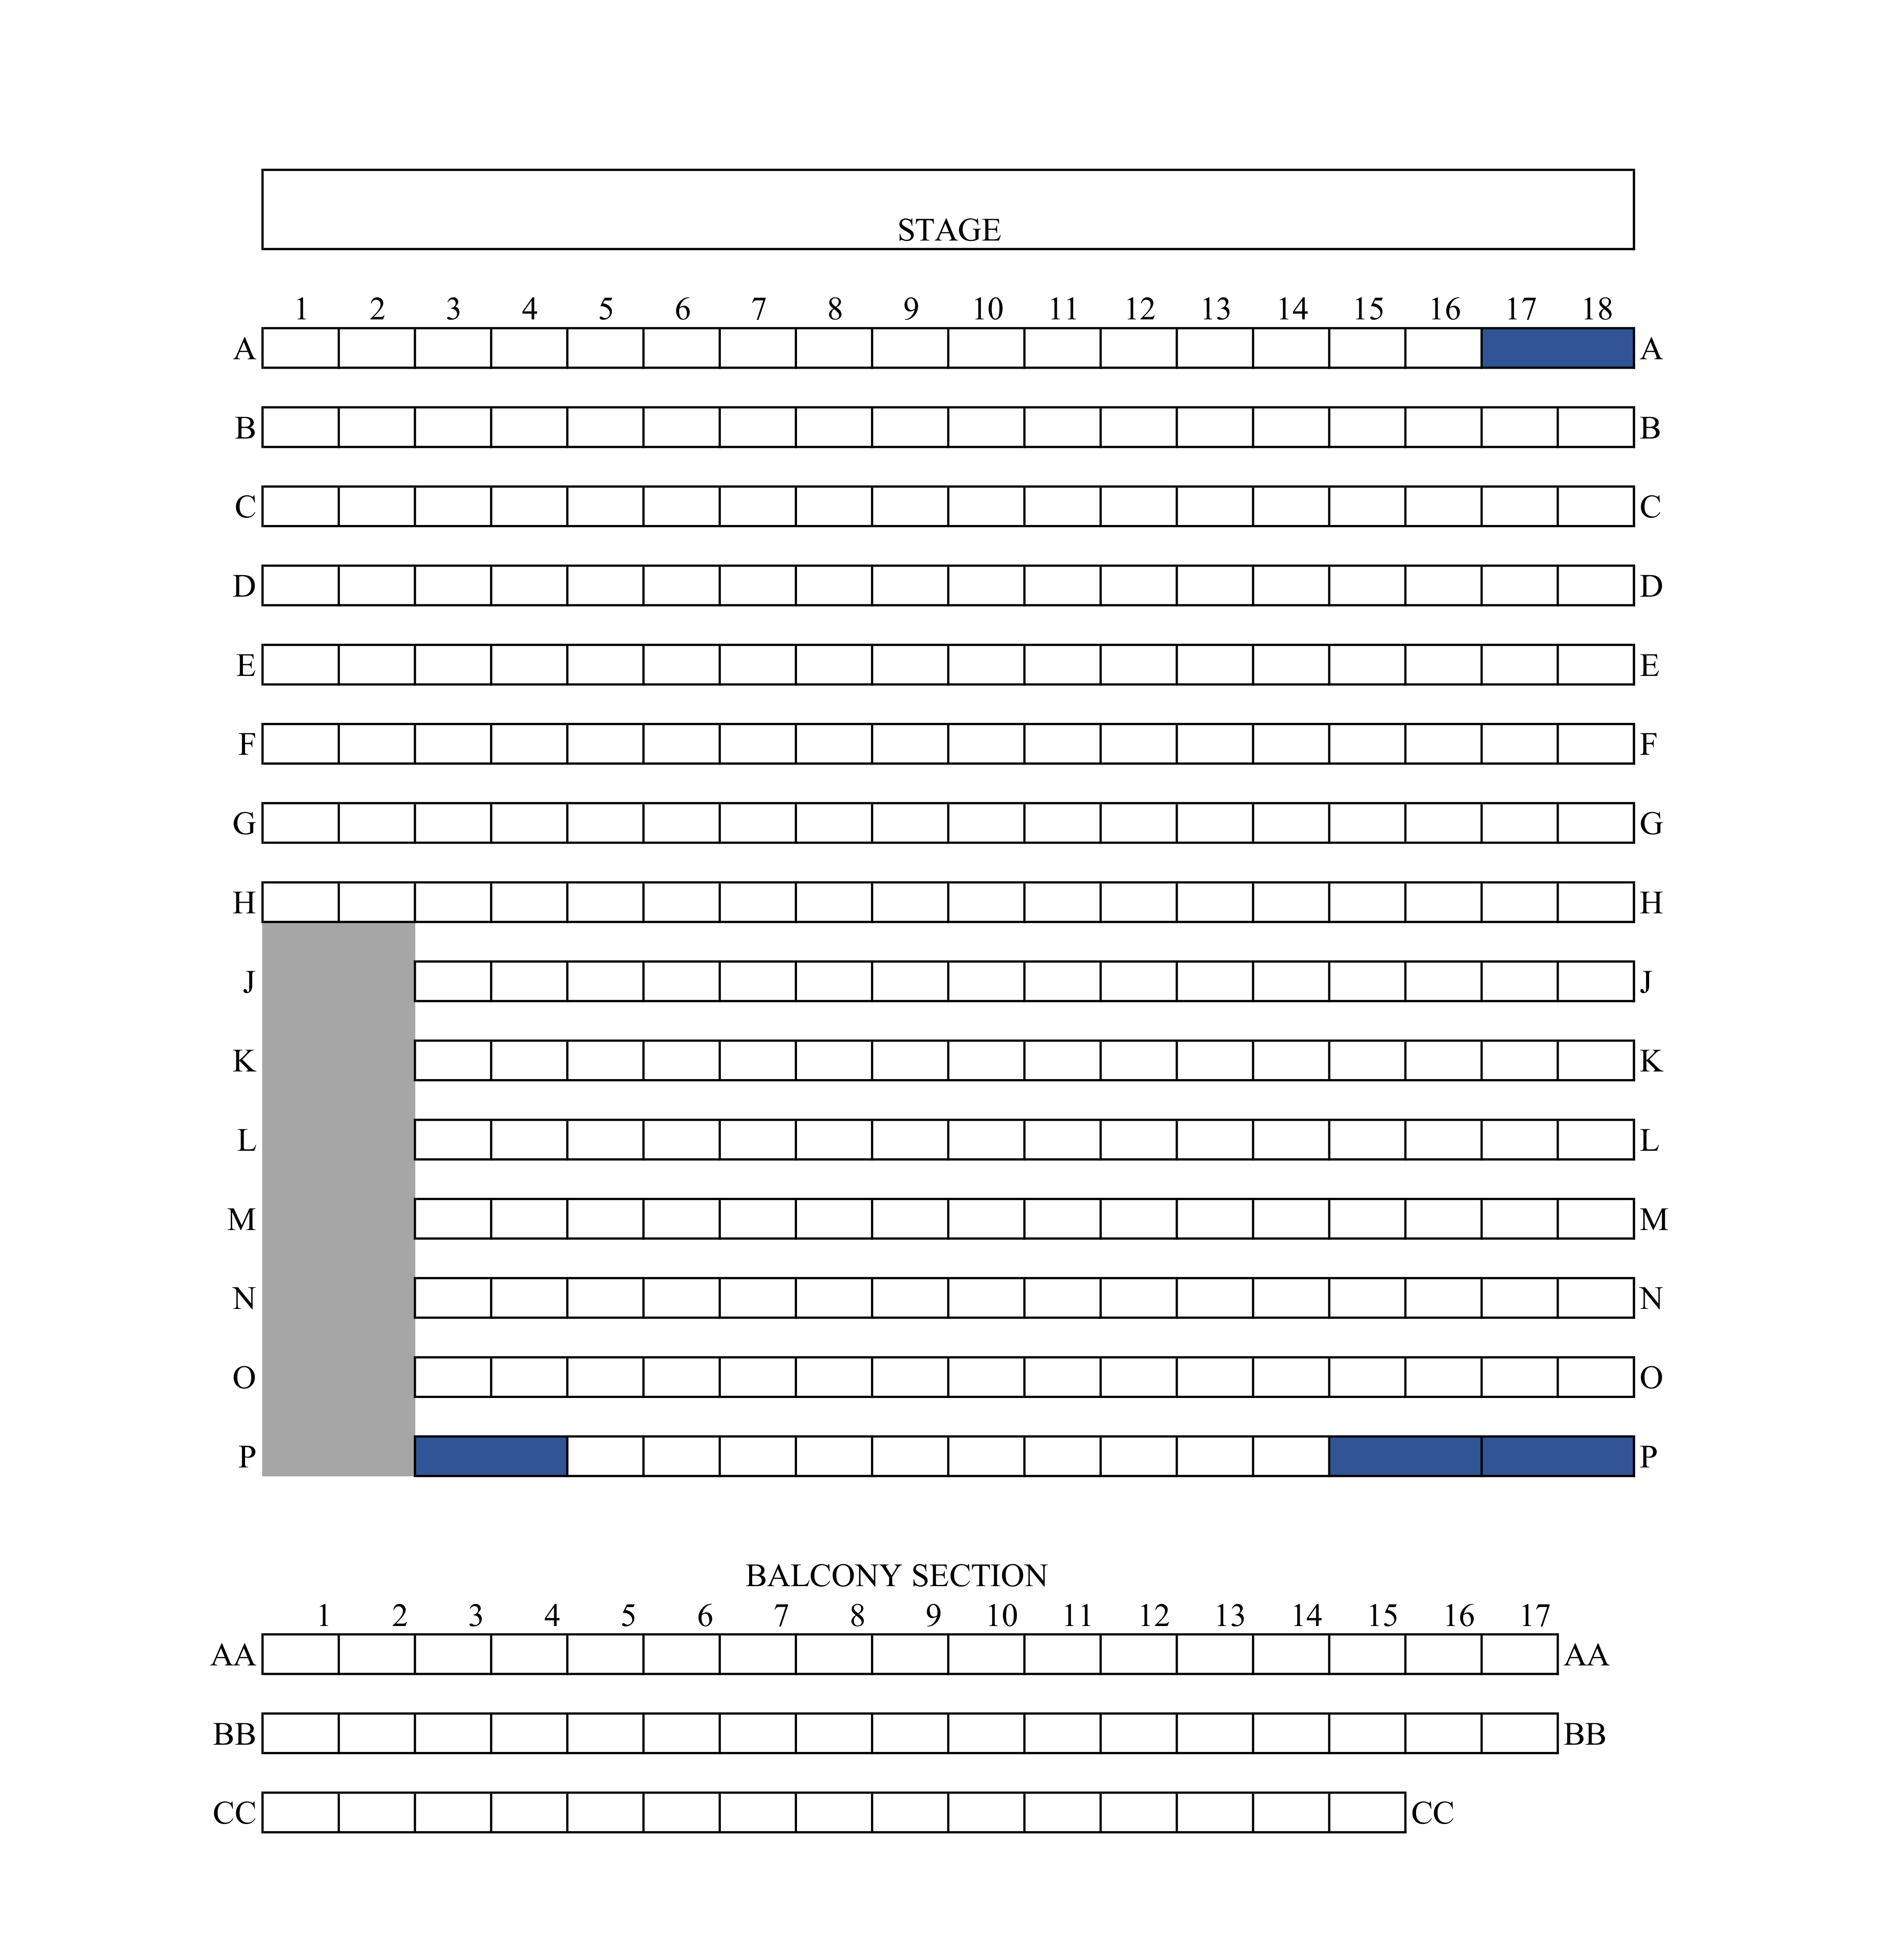 Norris Penrose Event Center Seating Chart